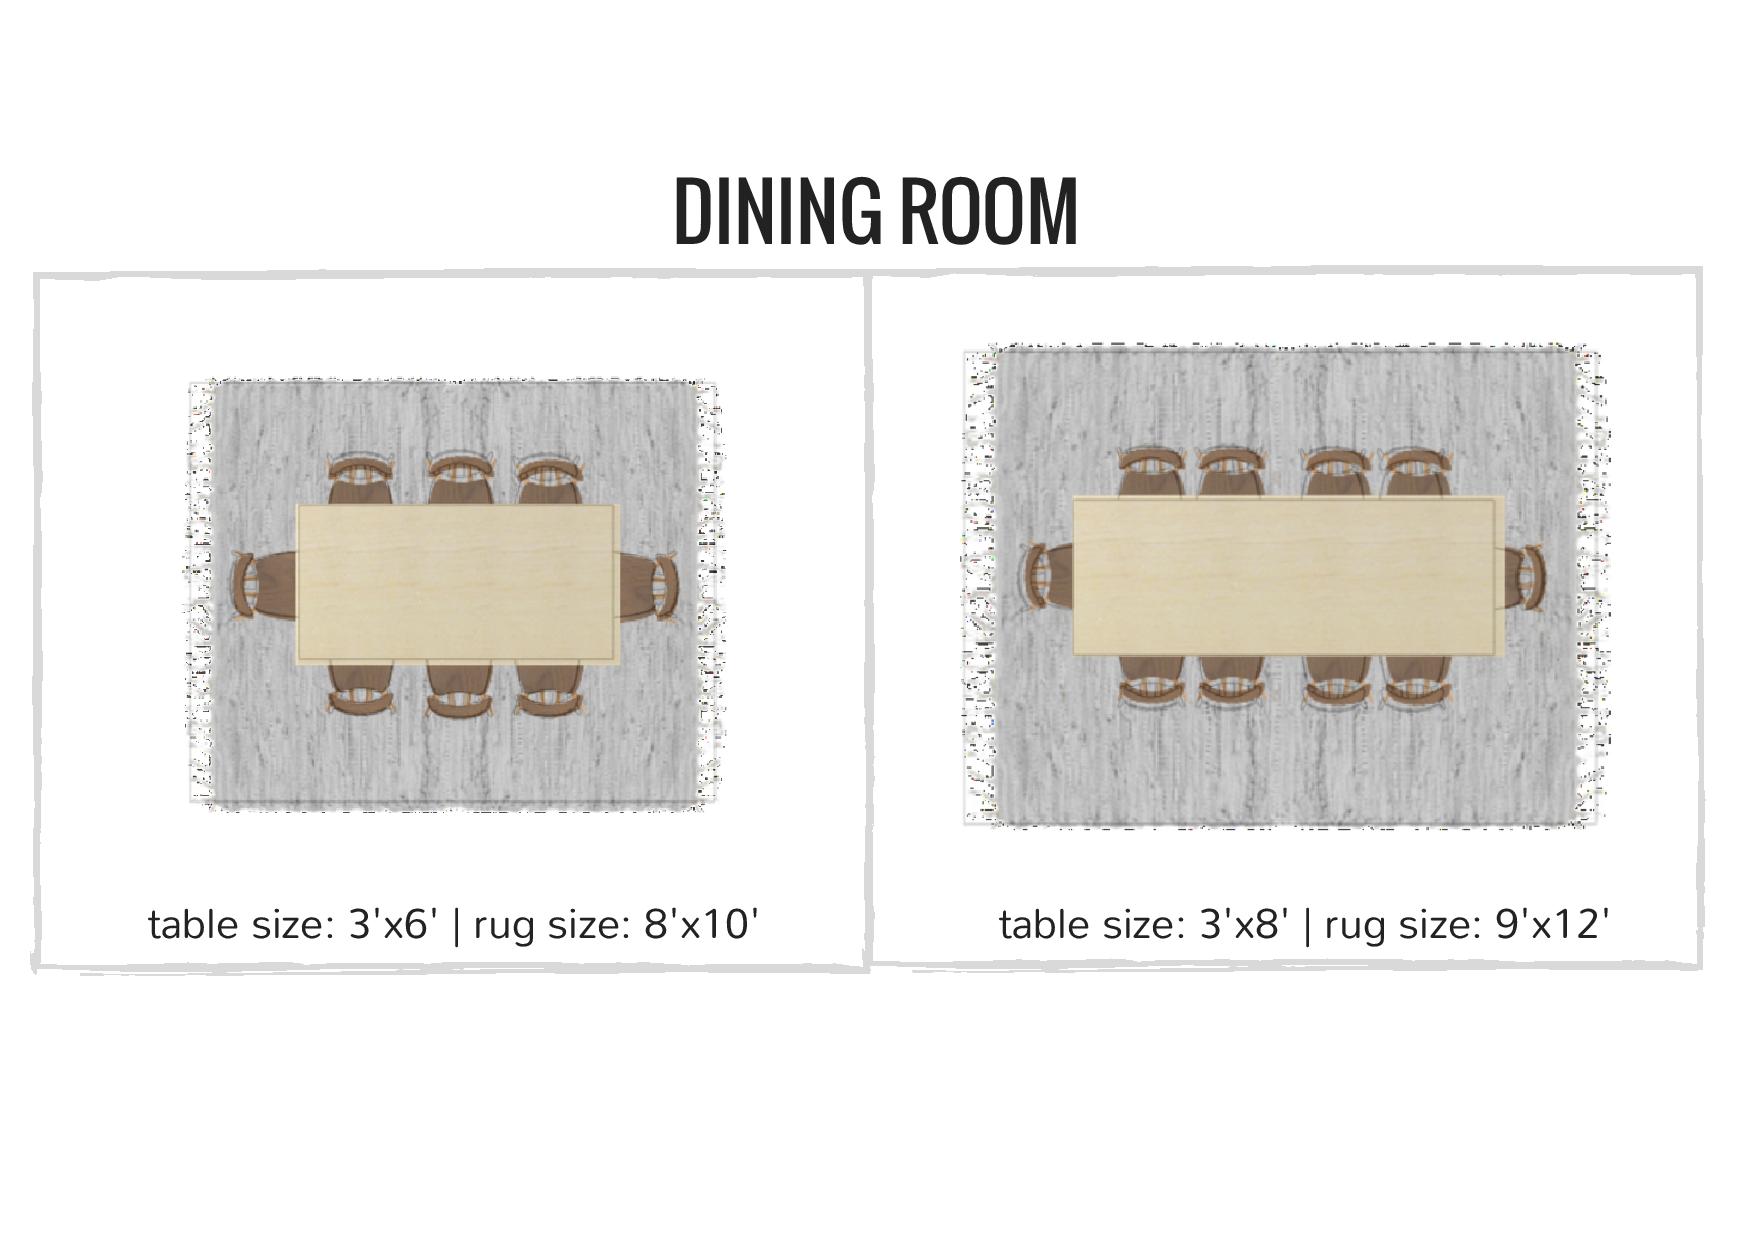 rug sizing and placement guide - what size rug do you need for your dining room